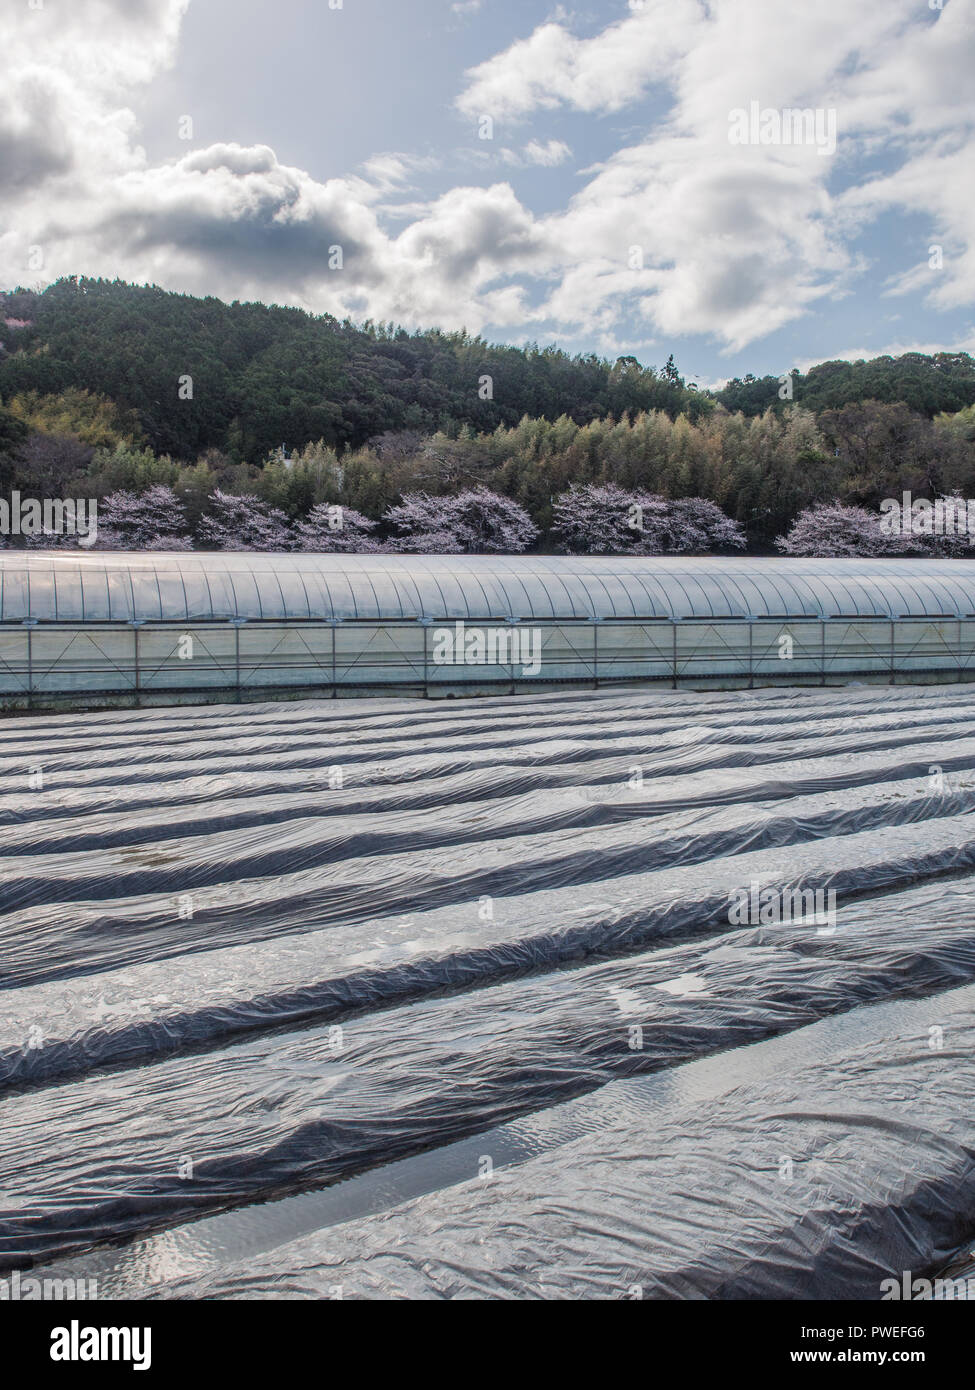 Plastic tunnel house and plastic horticulture, with hanami, sakura cherry in blossom, industrial agriculture, rural landscape, Kochi, Shikoku, Japan Stock Photo